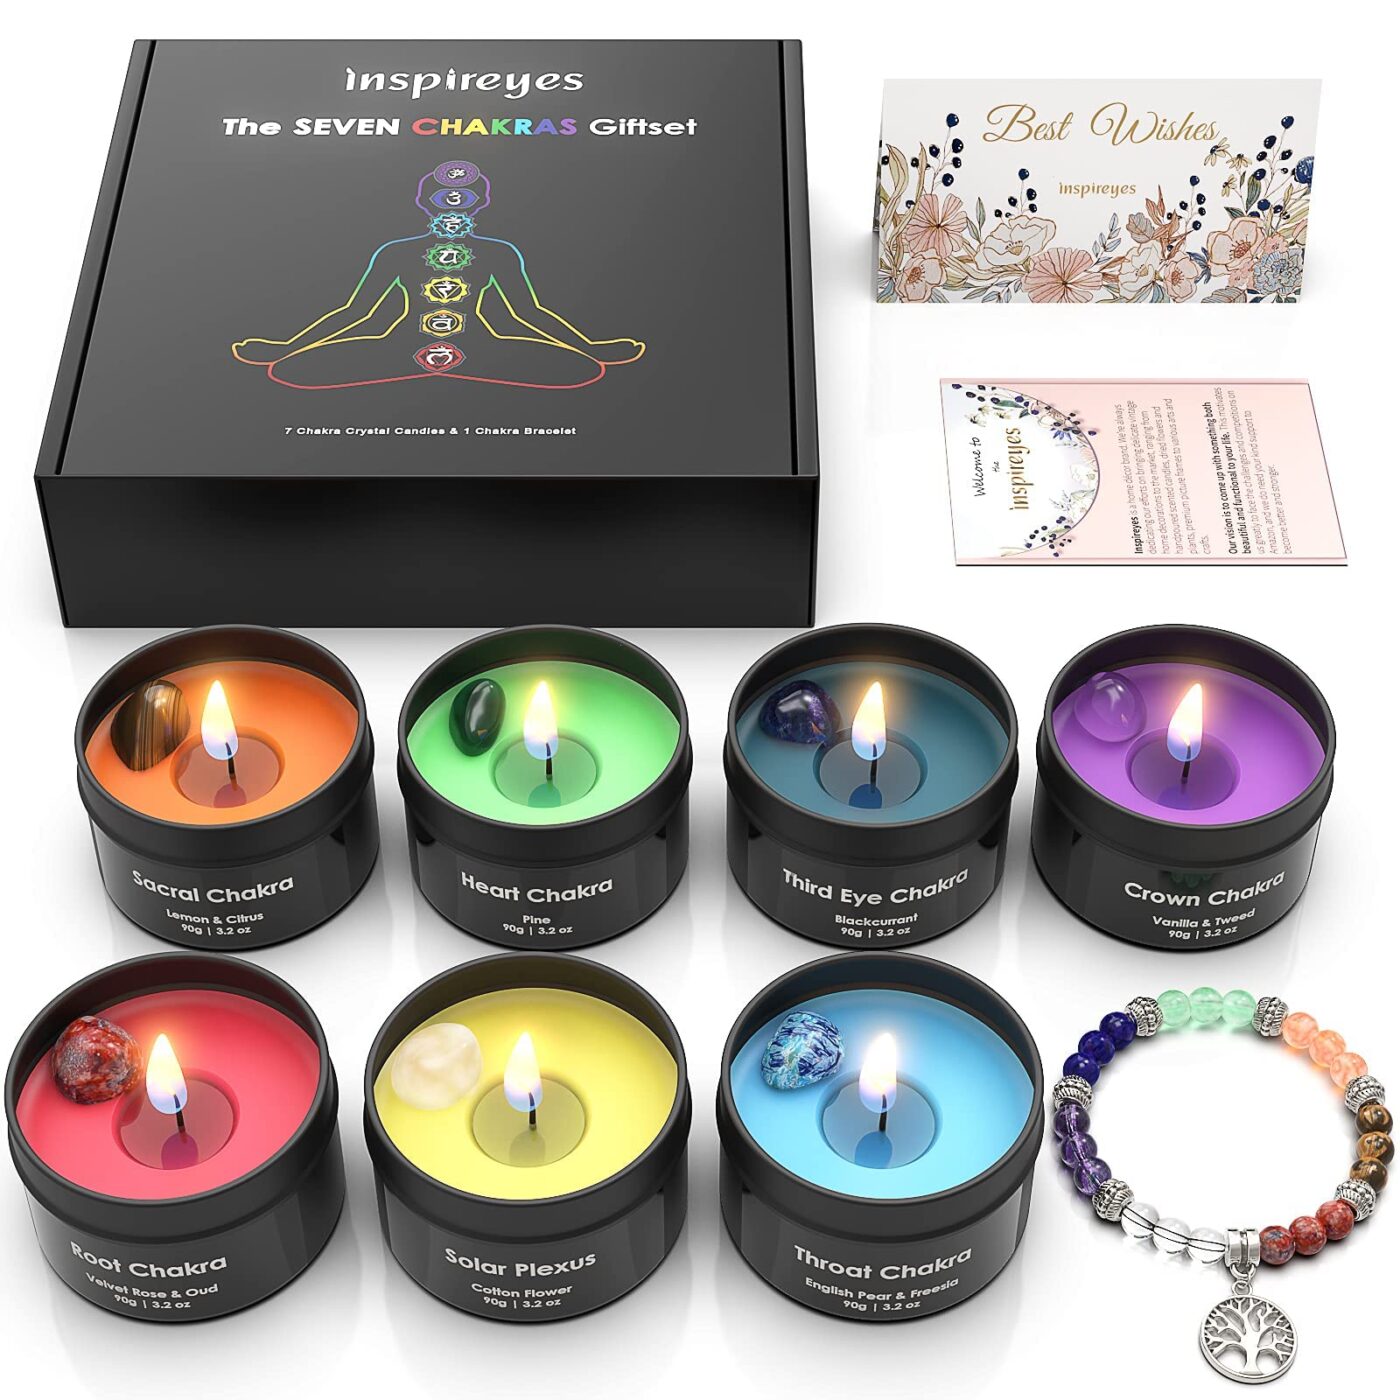 Discover unique spiritual gifts that inspire growth and reflection.</p><p>From healing crystals to spiritual art, deepen your practice and connect with your beliefs.